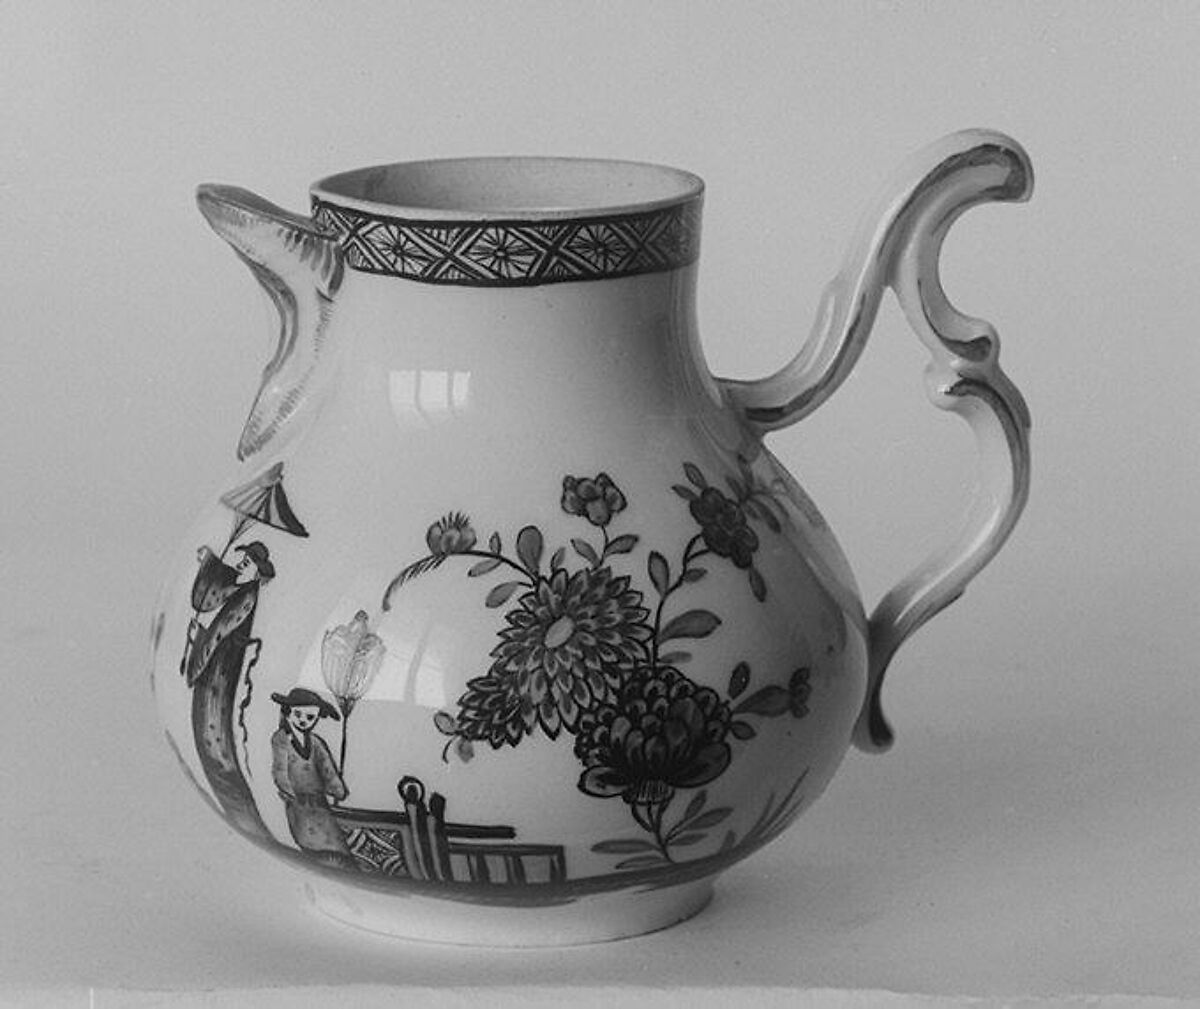 Cream jug, Zurich Pottery and Porcelain Factory (Swiss, founded 1763), Hard-paste porcelain, Swiss, Zurich 